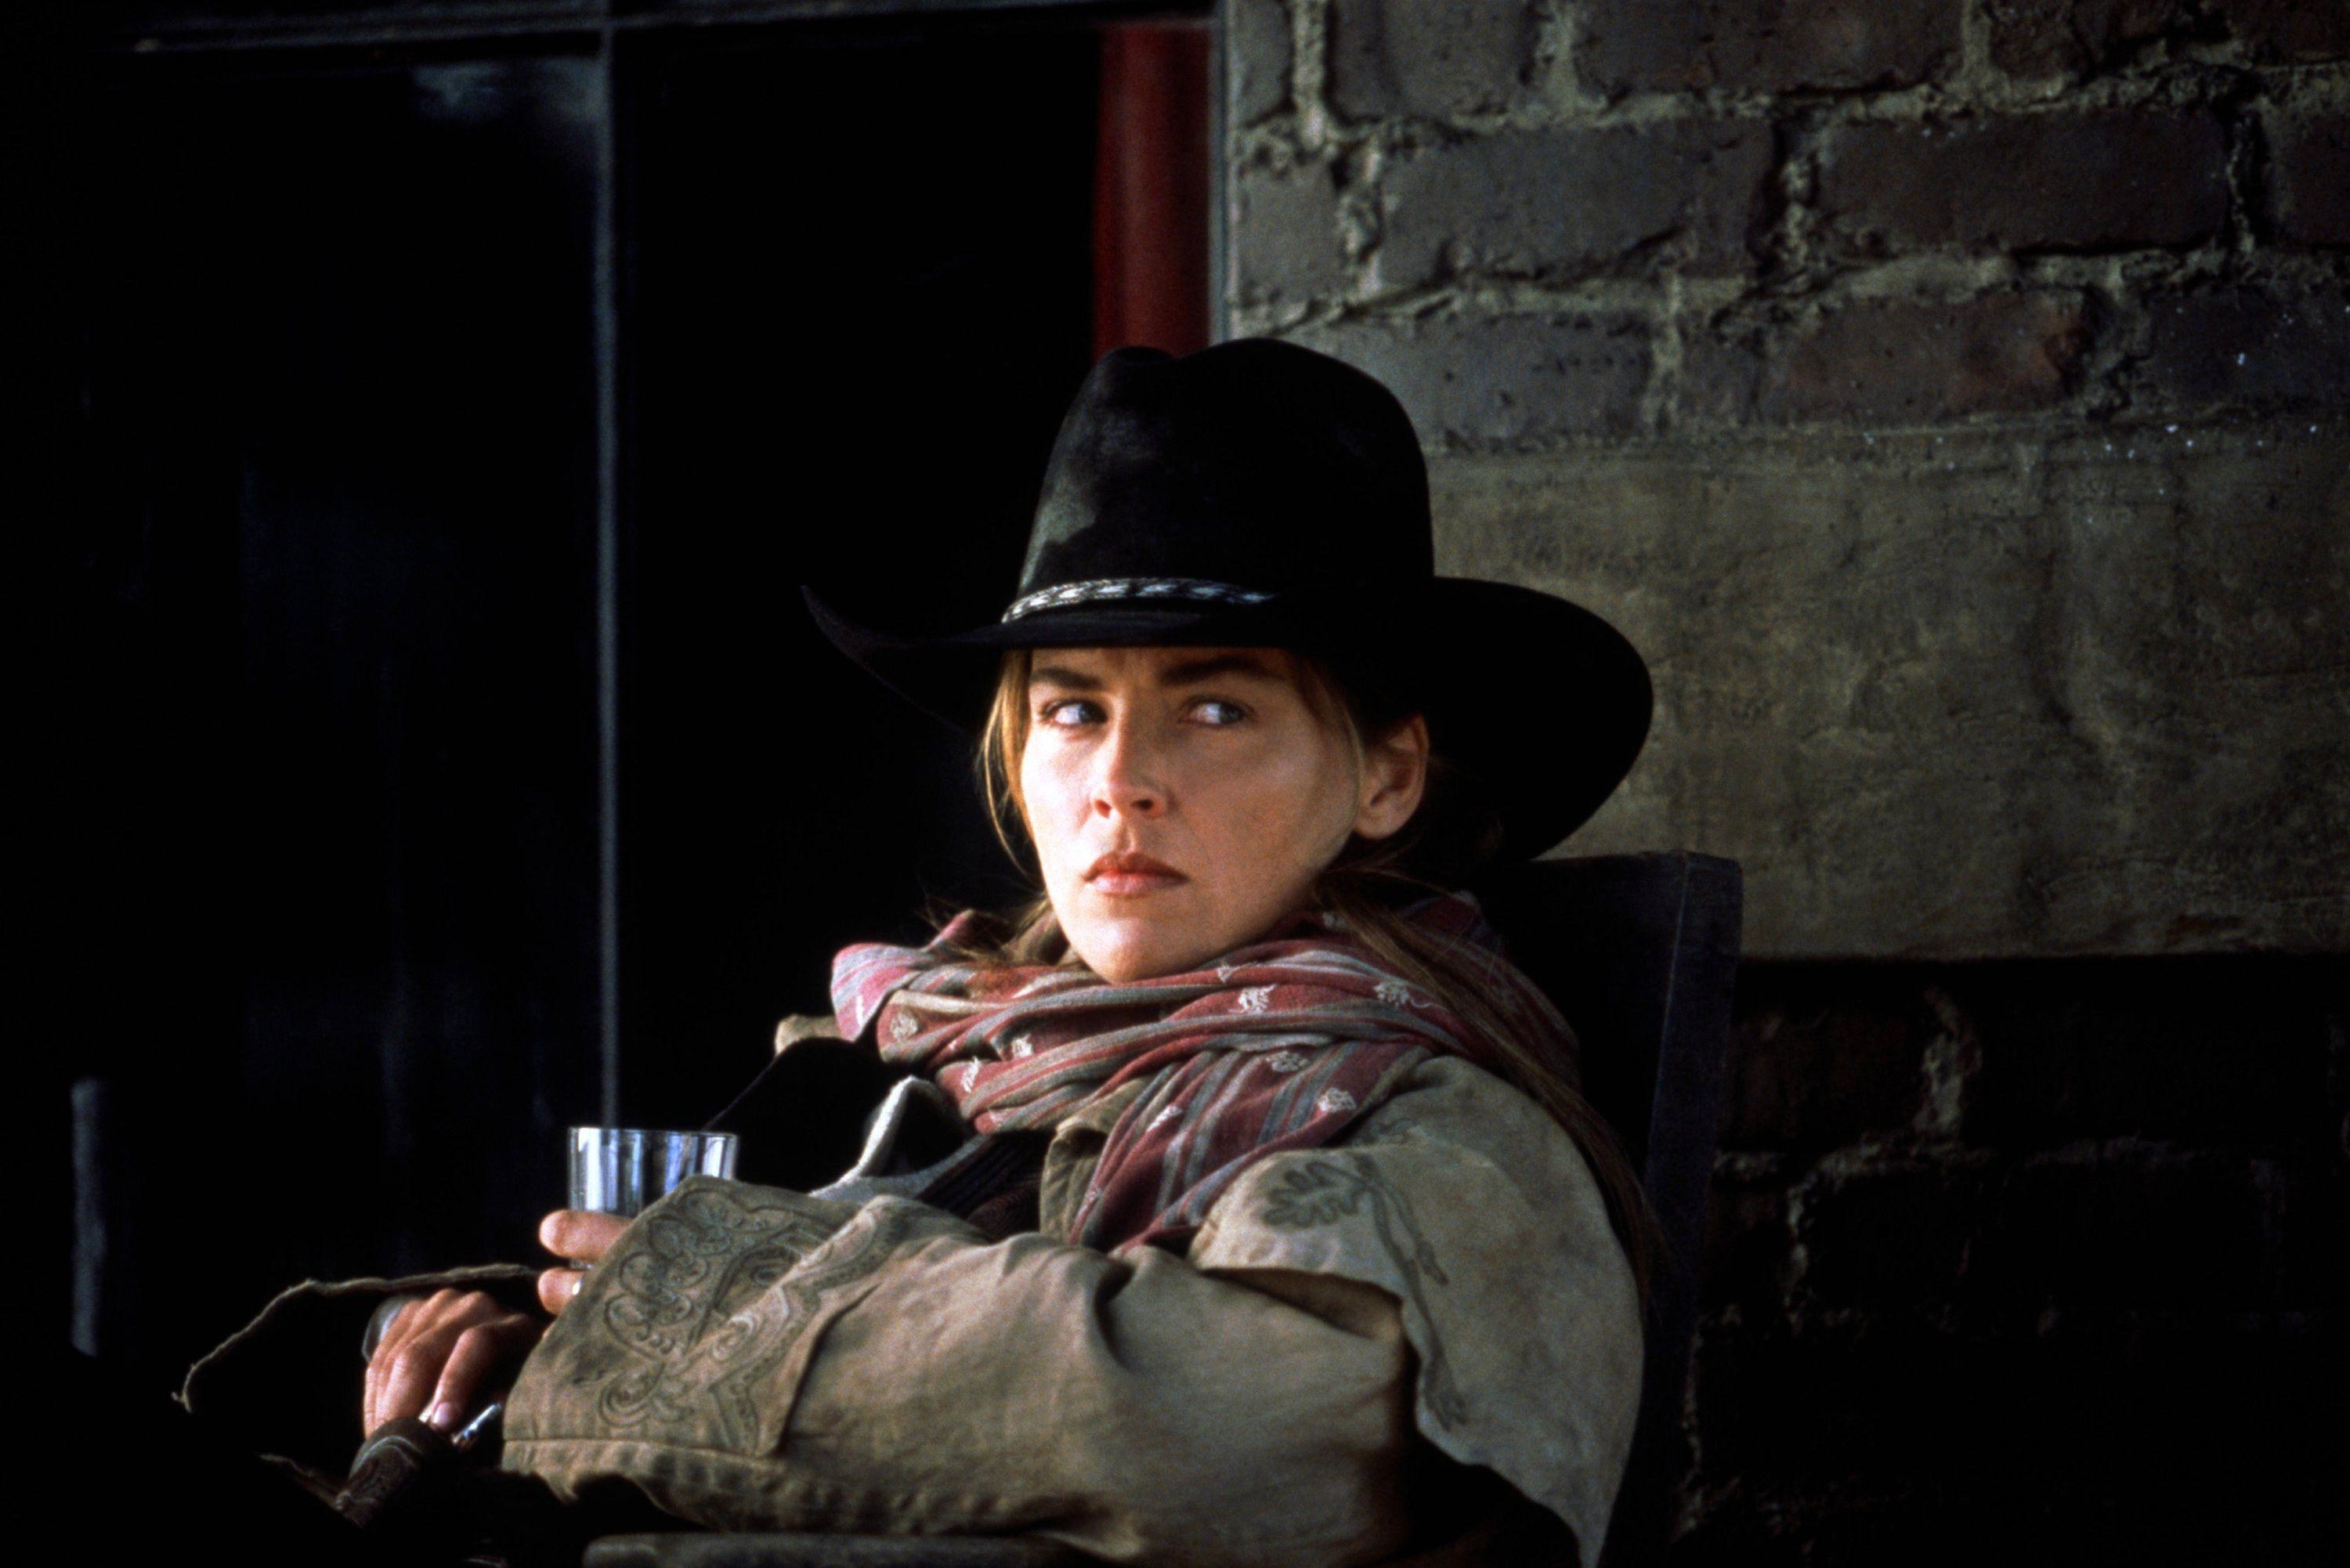 Sharon Stone in a dusty cowboy get-up stares intensely while holding a glass cup and a holstered gun